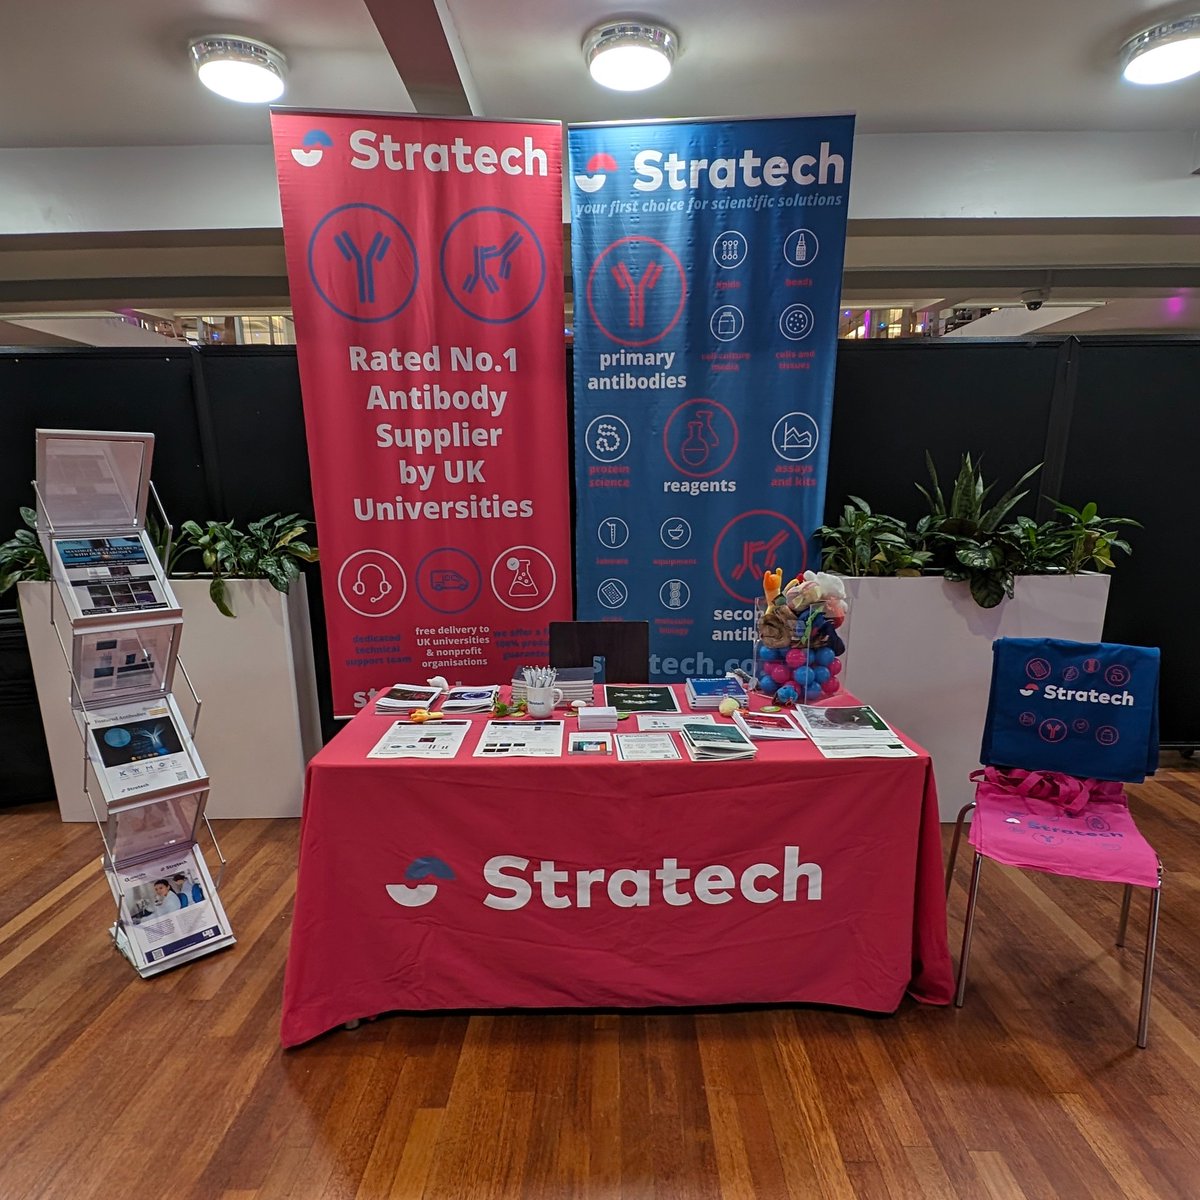 Drop by our stand today @AstburyCentre #AstburyConv find out more about our fantastic research solutions we offer. Plus enter for the opportunity to win @GIANTmicrobes 
@ScienceLeeds @LeedsUniEng @chemleedsuni @LeedsMedHealth 
#lifesciences #bioscience #macromolecules